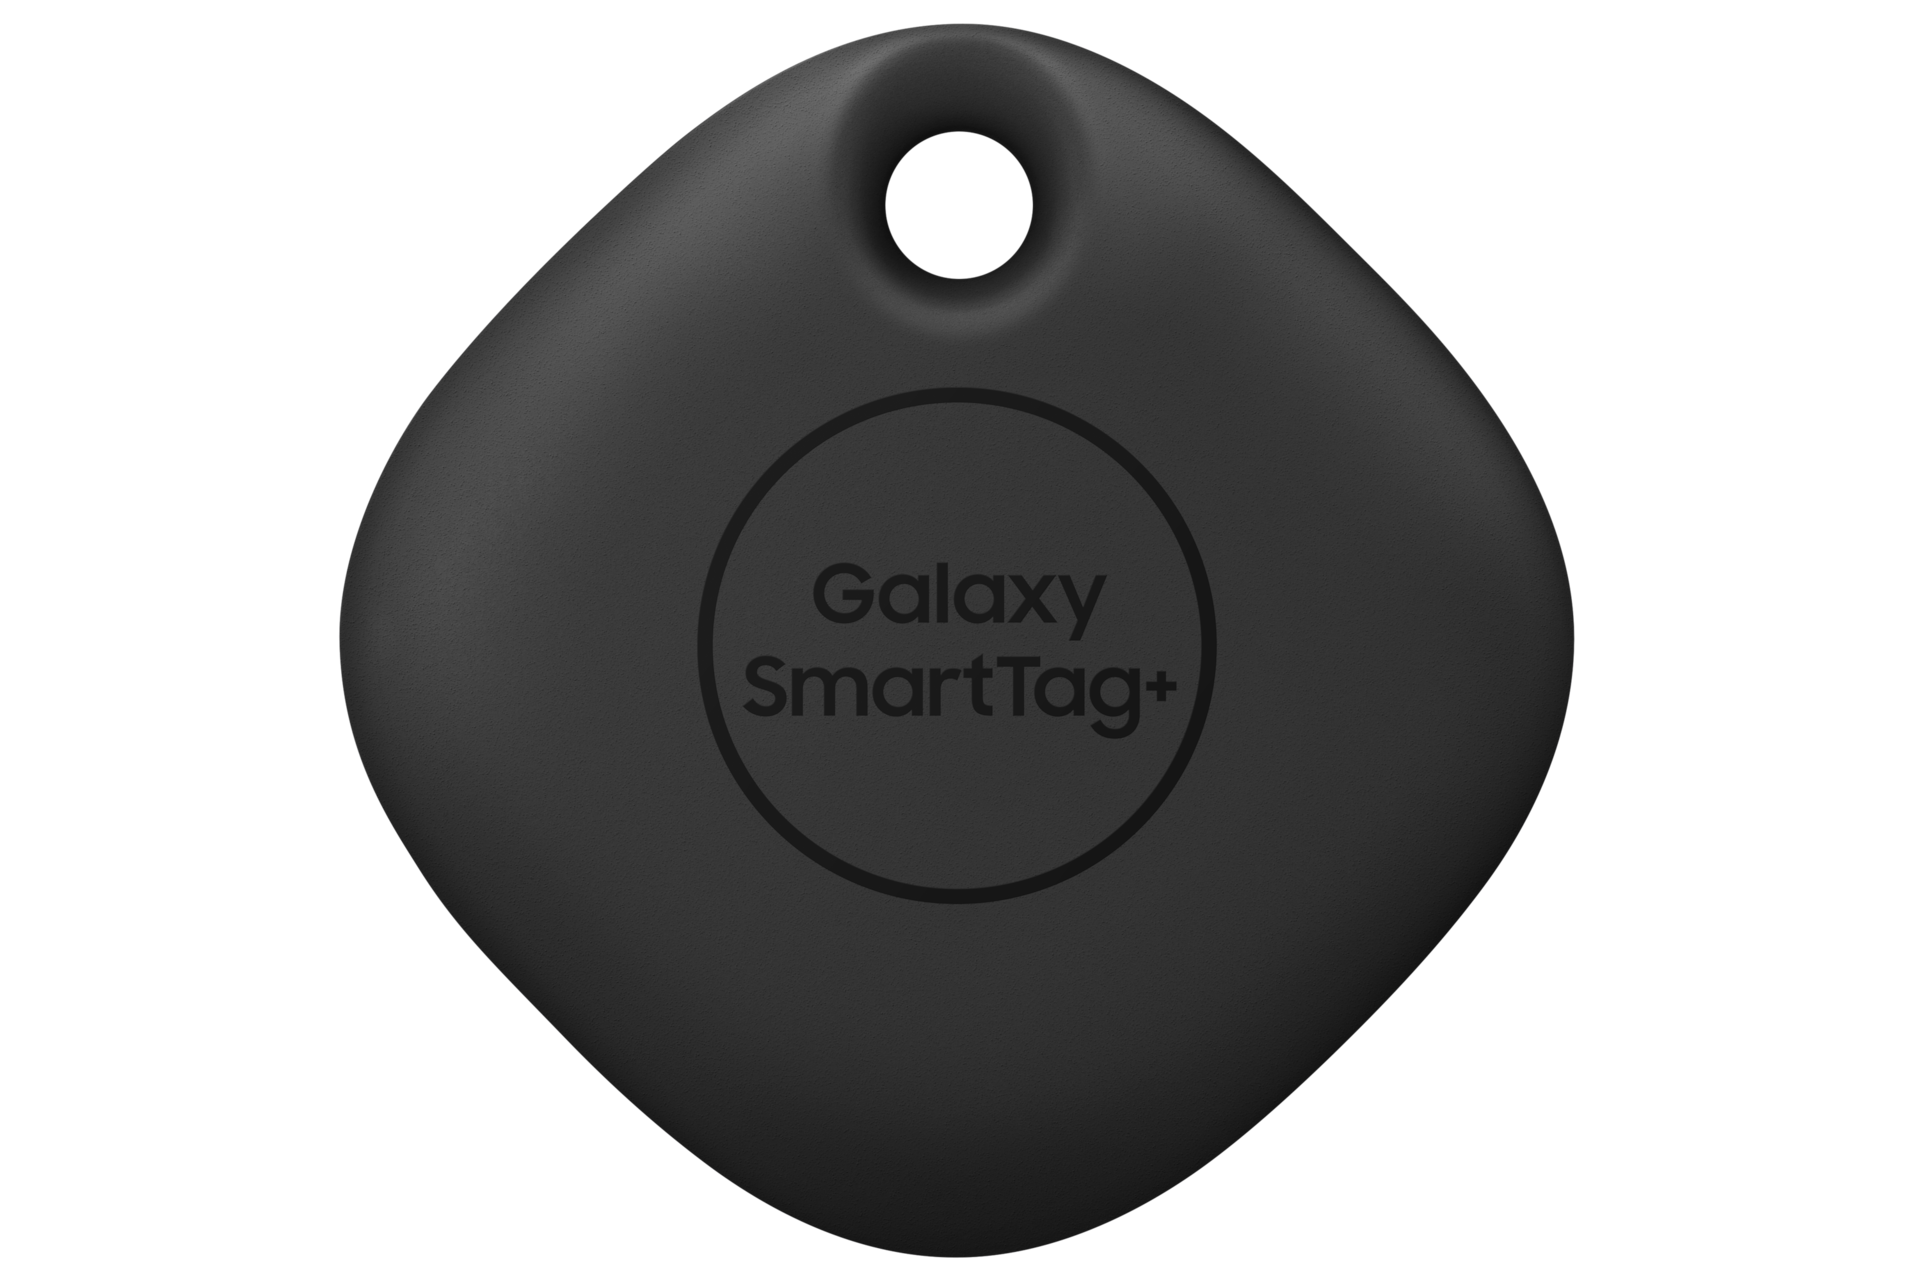 Samsung Galaxy SmartTag 2, Privacy & security guide